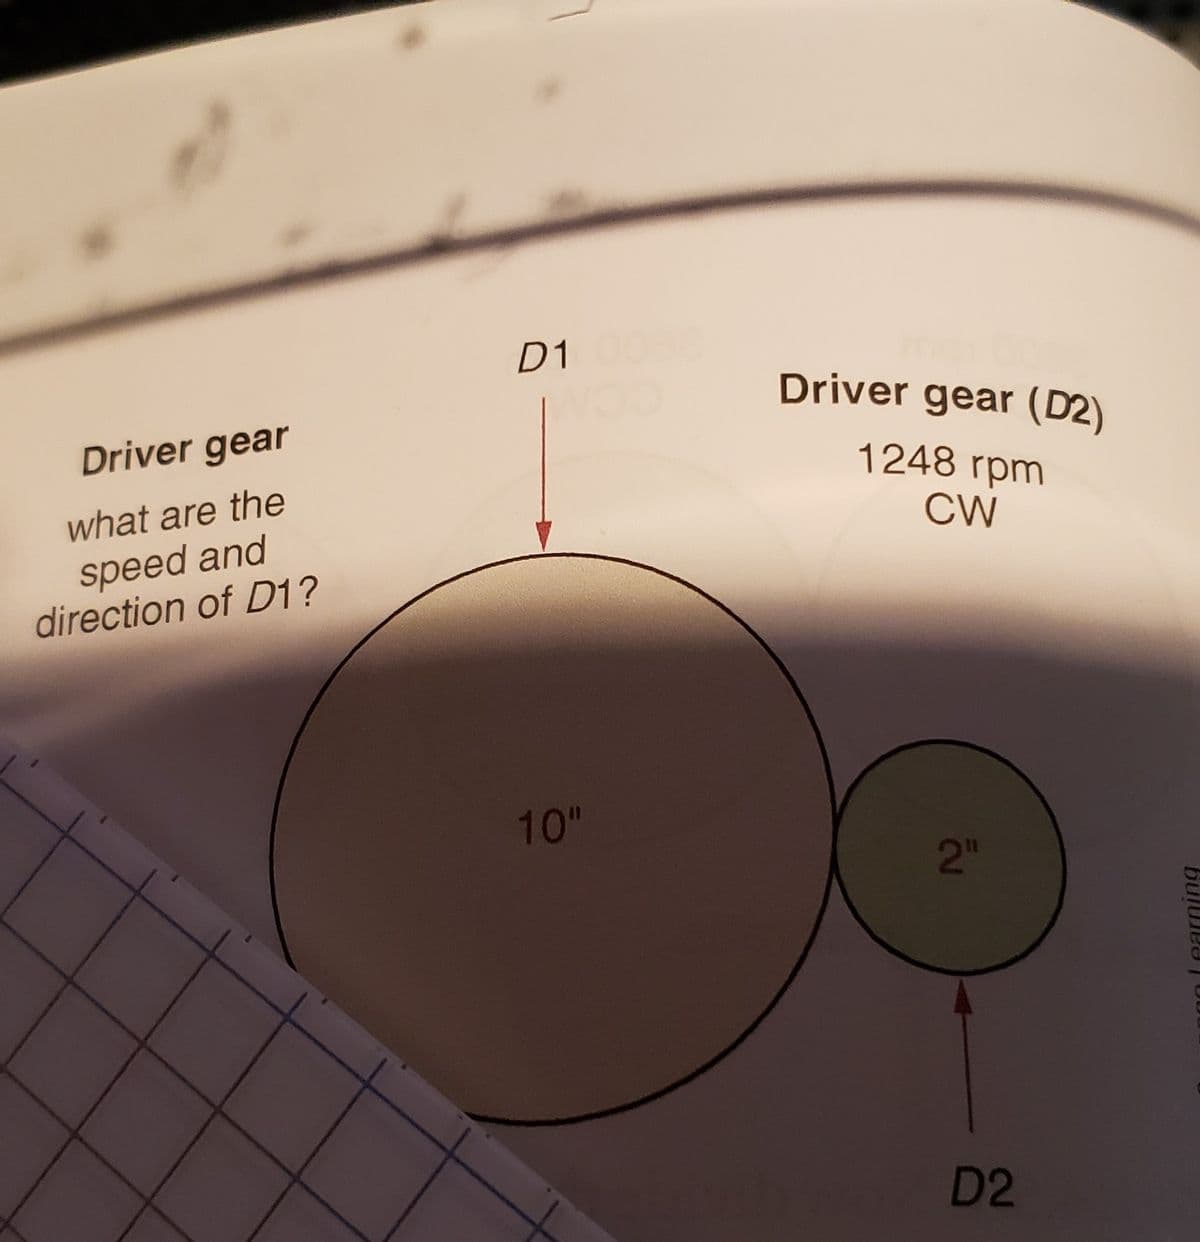 D1
Driver gear (D2)
Driver gear
1248 rpm
what are the
CW
speed and
direction of D1?
10"
2"
D2
1oLearning
